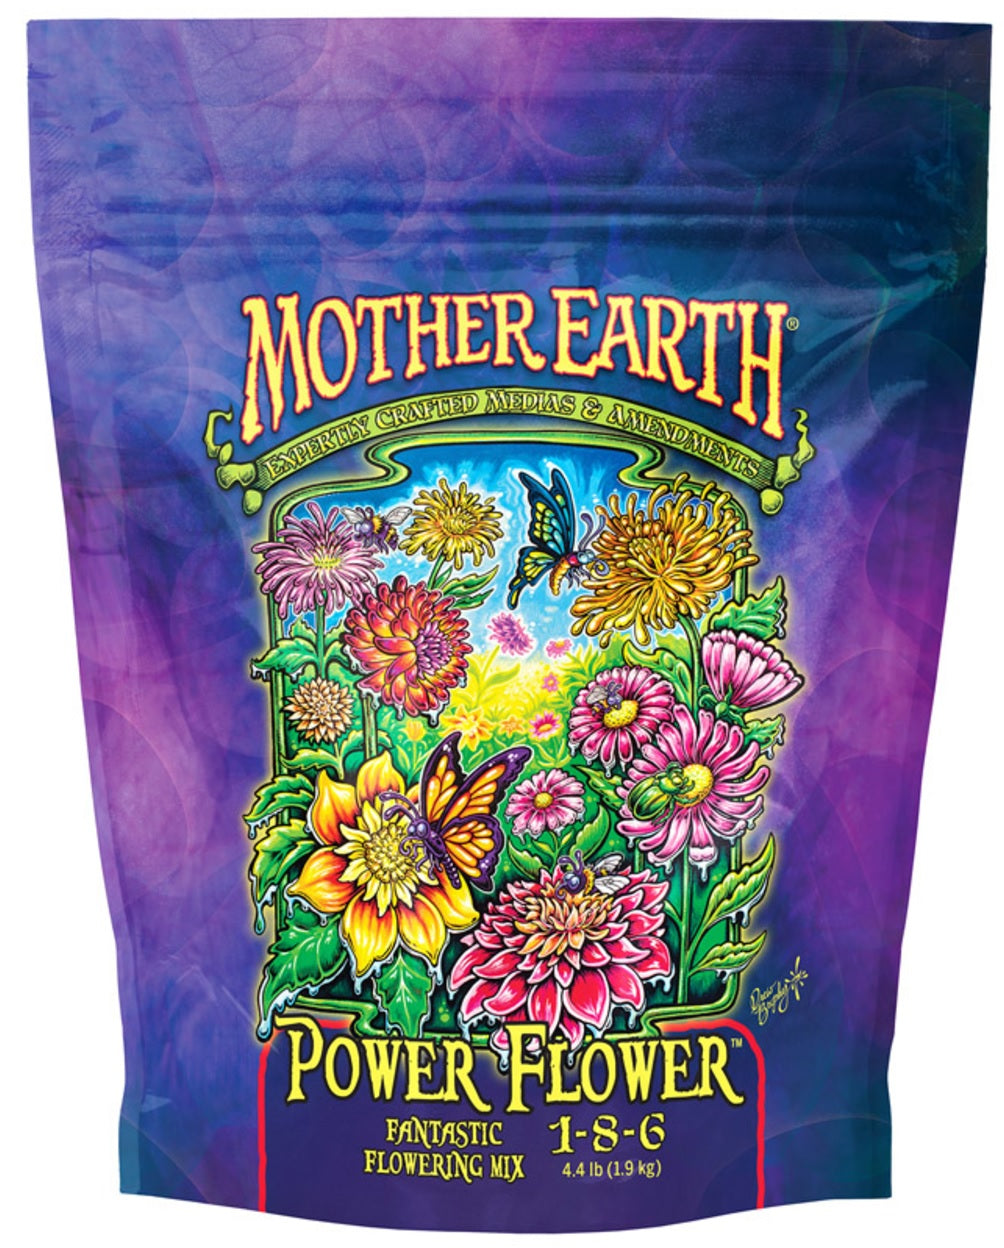 Mother Earth HGC733952 Power Flower Planting Mix, 4.4 Lbs